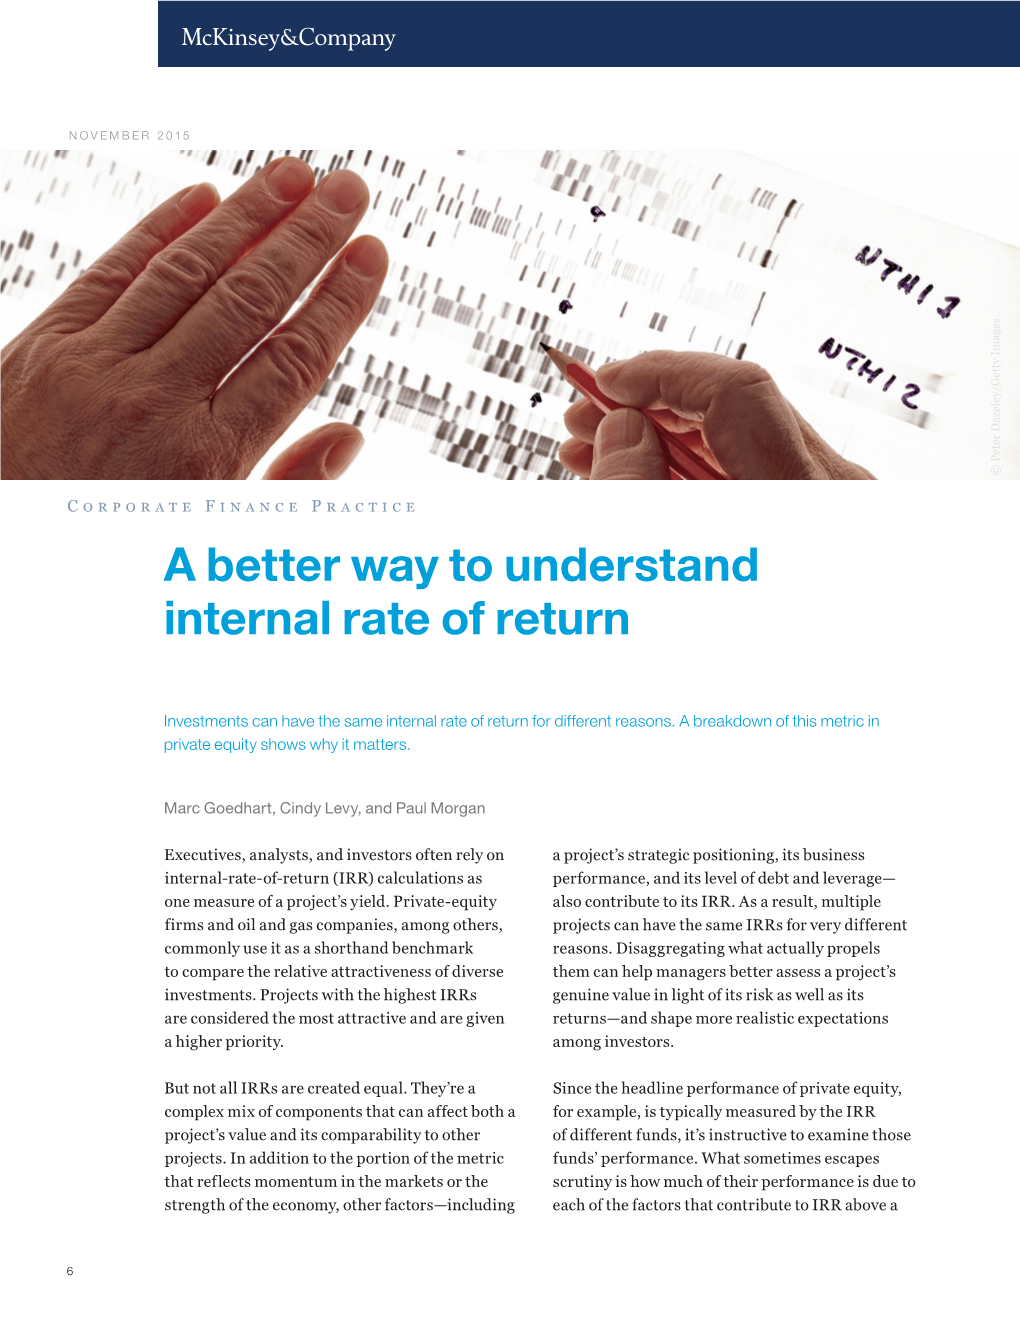 A Better Way to Understand Internal Rate of Return